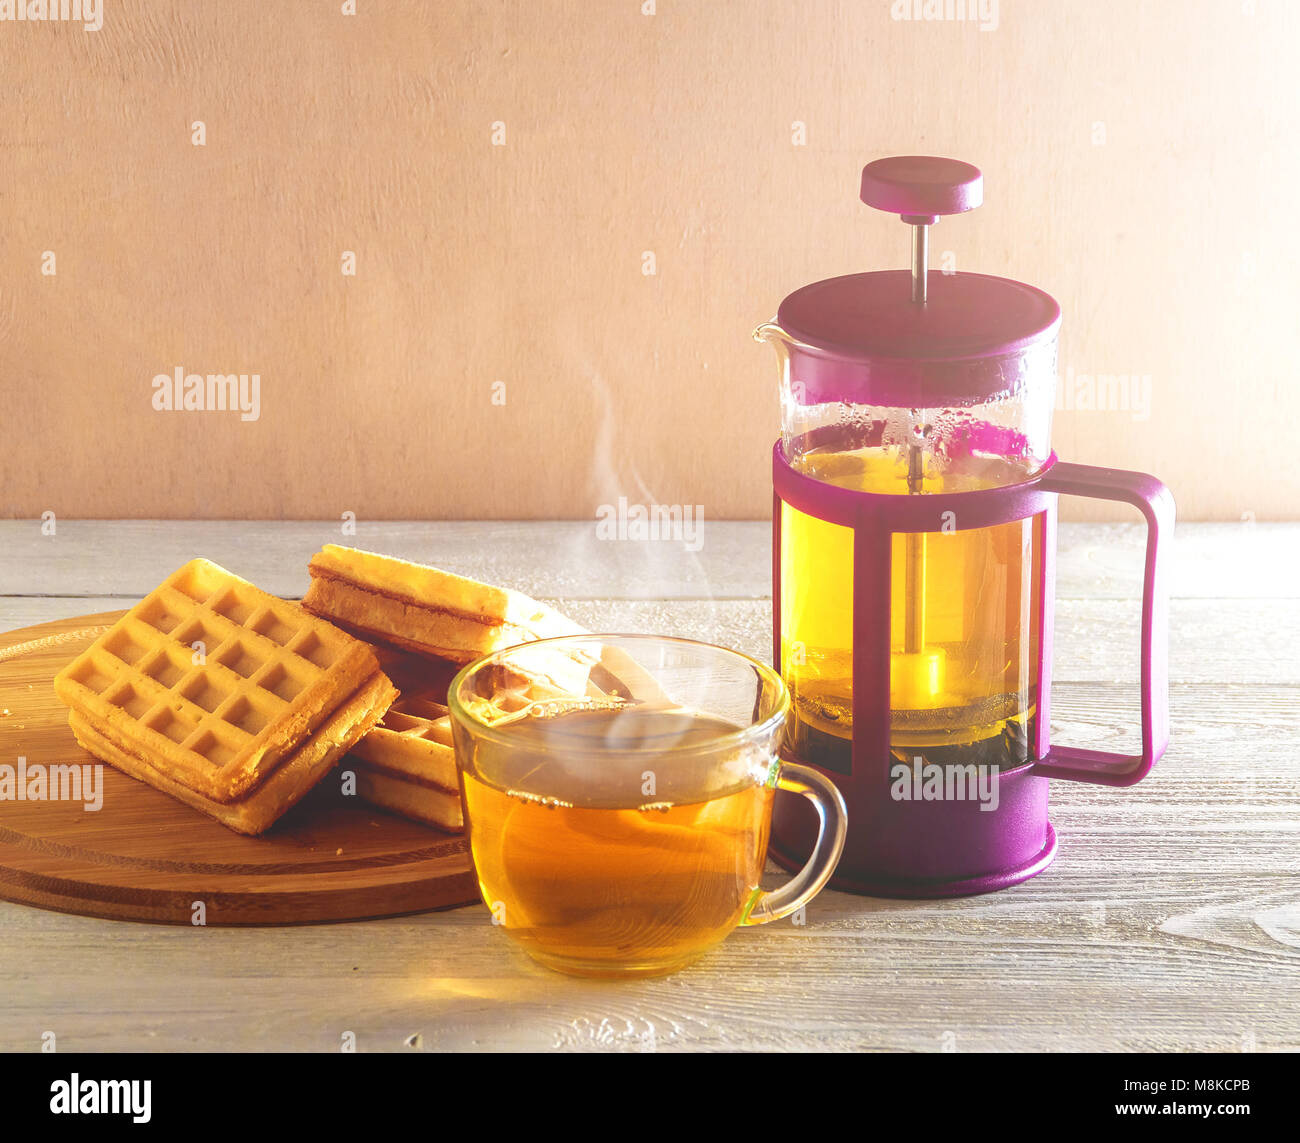 Homemade Waffles with Jam on Old Wooden Table. Wafers with Cup of Tea with Teapot. Stock Photo